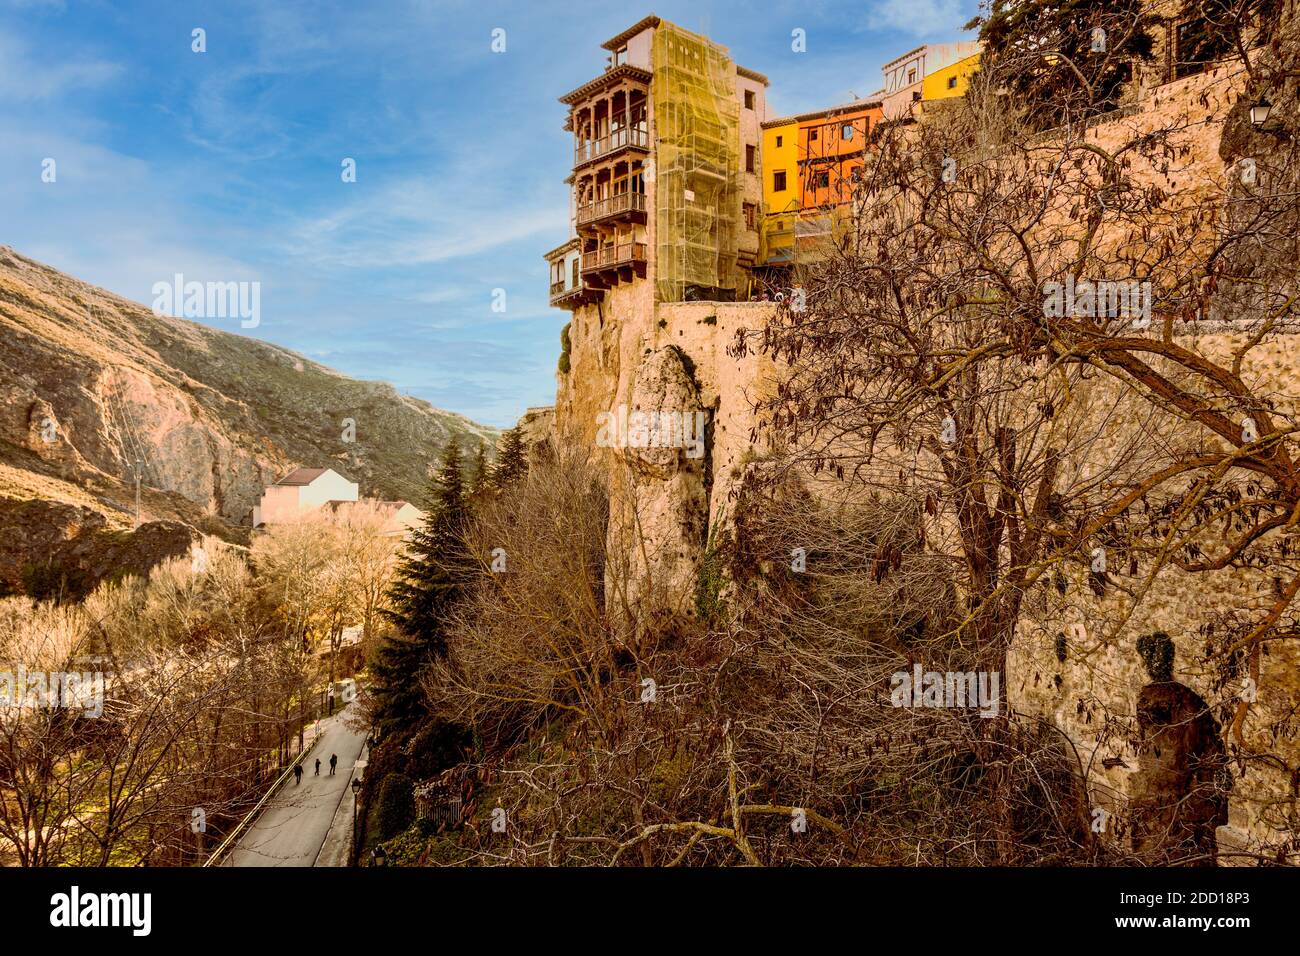 Hanging houses on the cliffs in the city of Cuenca. Spain Stock Photo